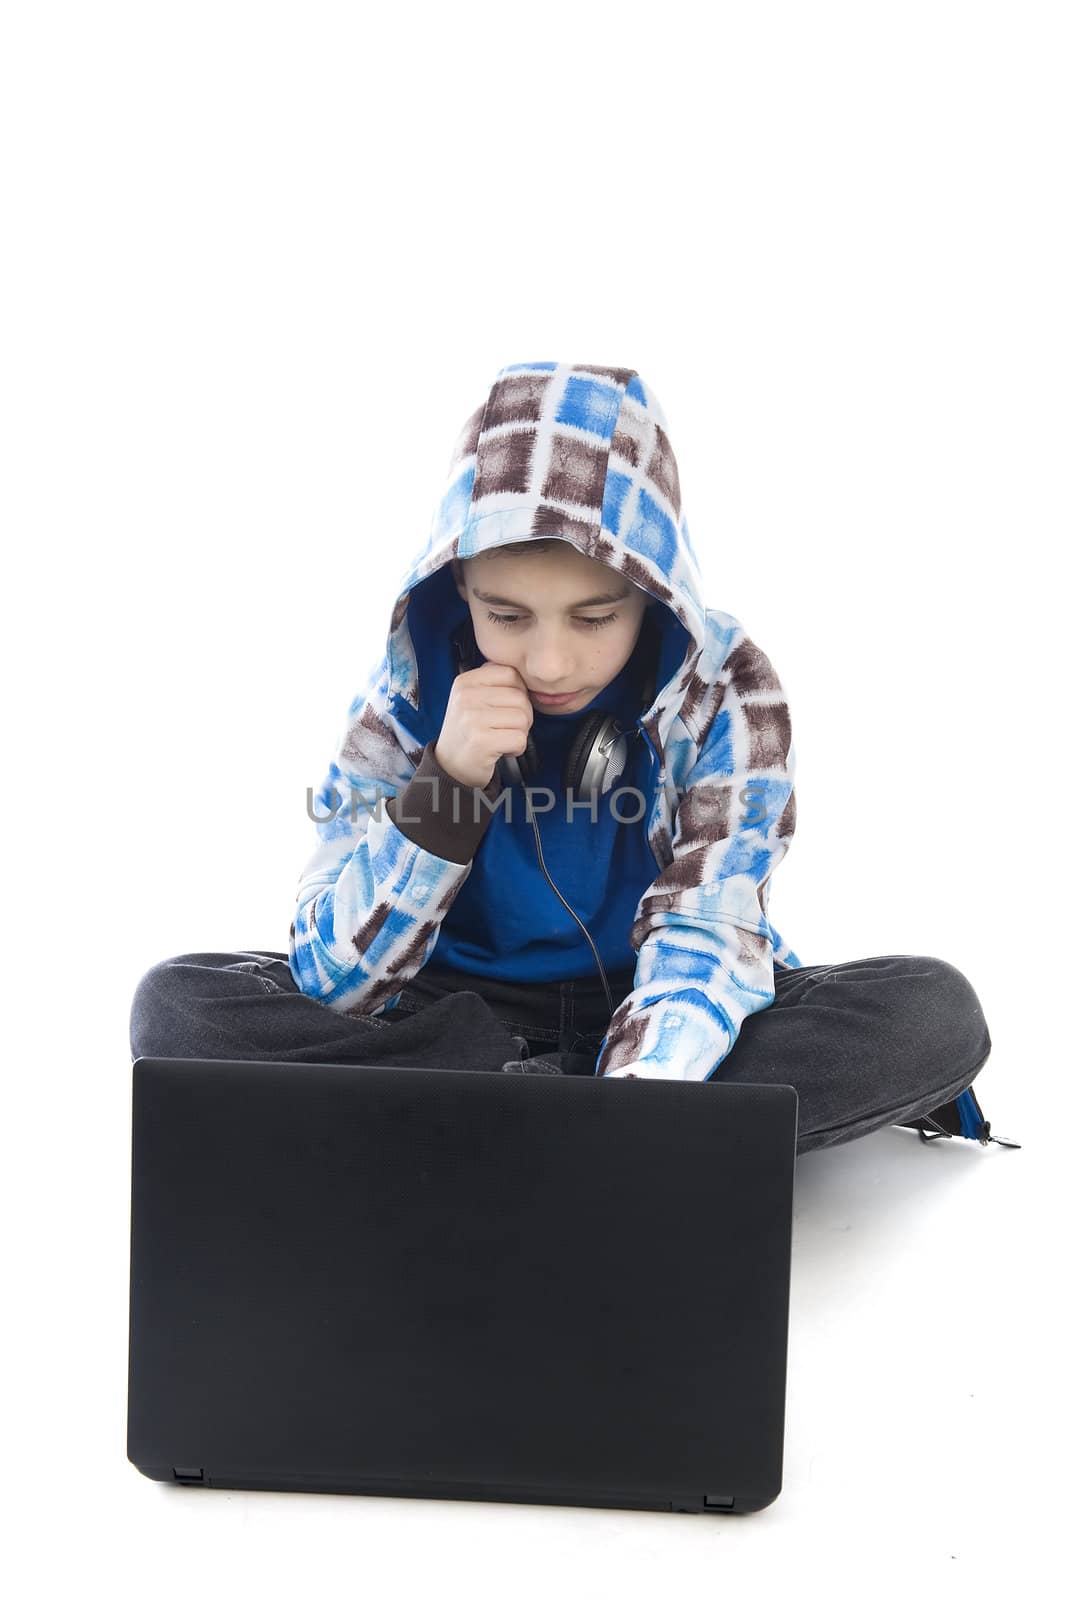 boy with laptop by Gabees